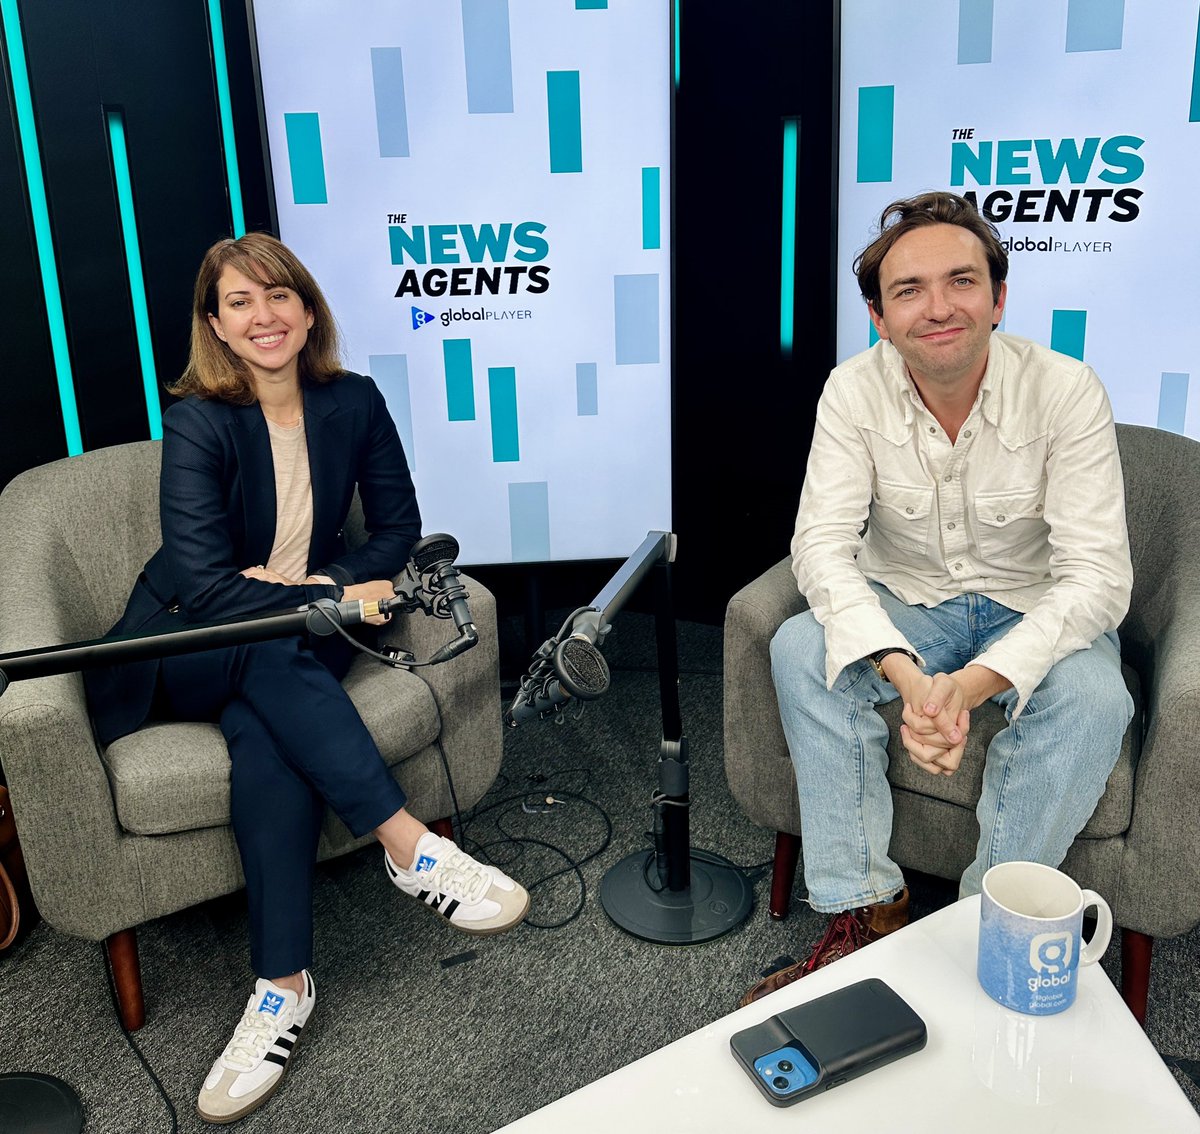 It was such a pleasure meeting @lewis_goodall & his team in person and talking about the Middle East-past, present and future-for @TheNewsAgents. Looking forward to people hearing our conversation. Lewis is one of the best interviewers I’ve sat with: kind, nuanced & thoughtful.